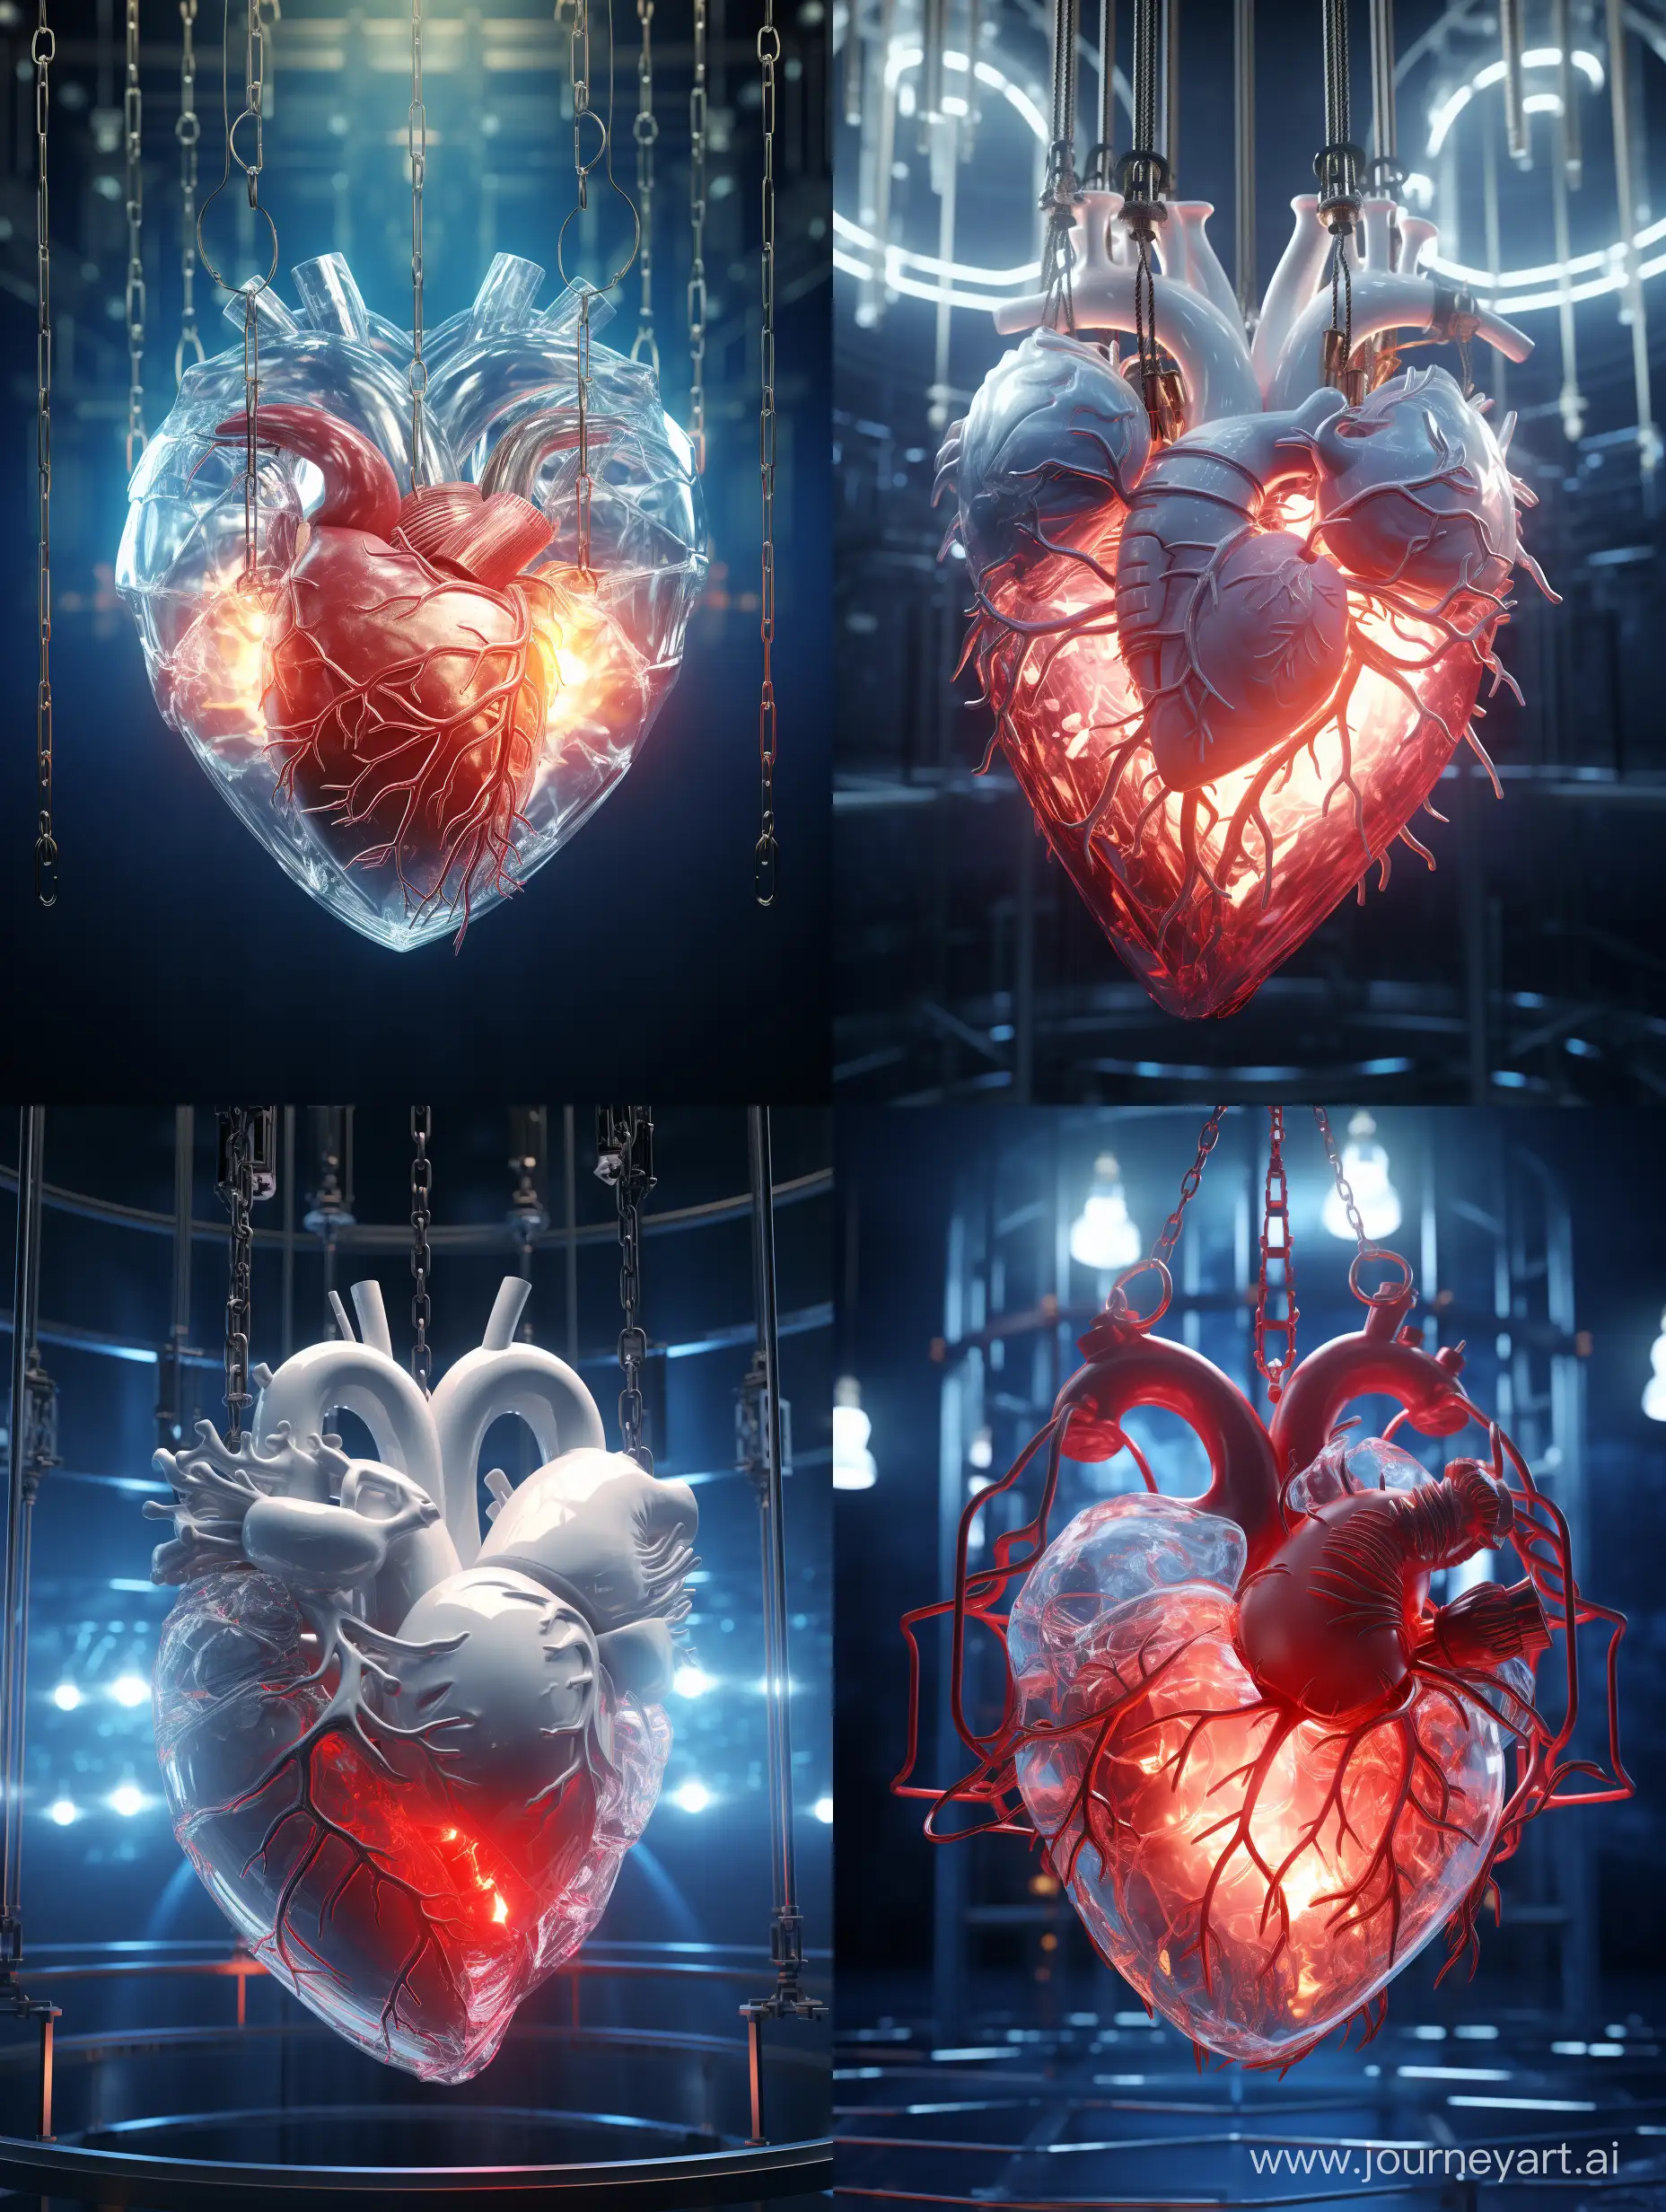 Insane depth, a realistic glass heart. Suspended with chains, pumping with bright white currents of electricity, high quality CGI VFX, tonal contrast, glowing translucency, bright highlights, HDR, realistic Heart Chambers, Valves, Vessels, Wall and Conduction System with electric currents passing through, energy and electricity
